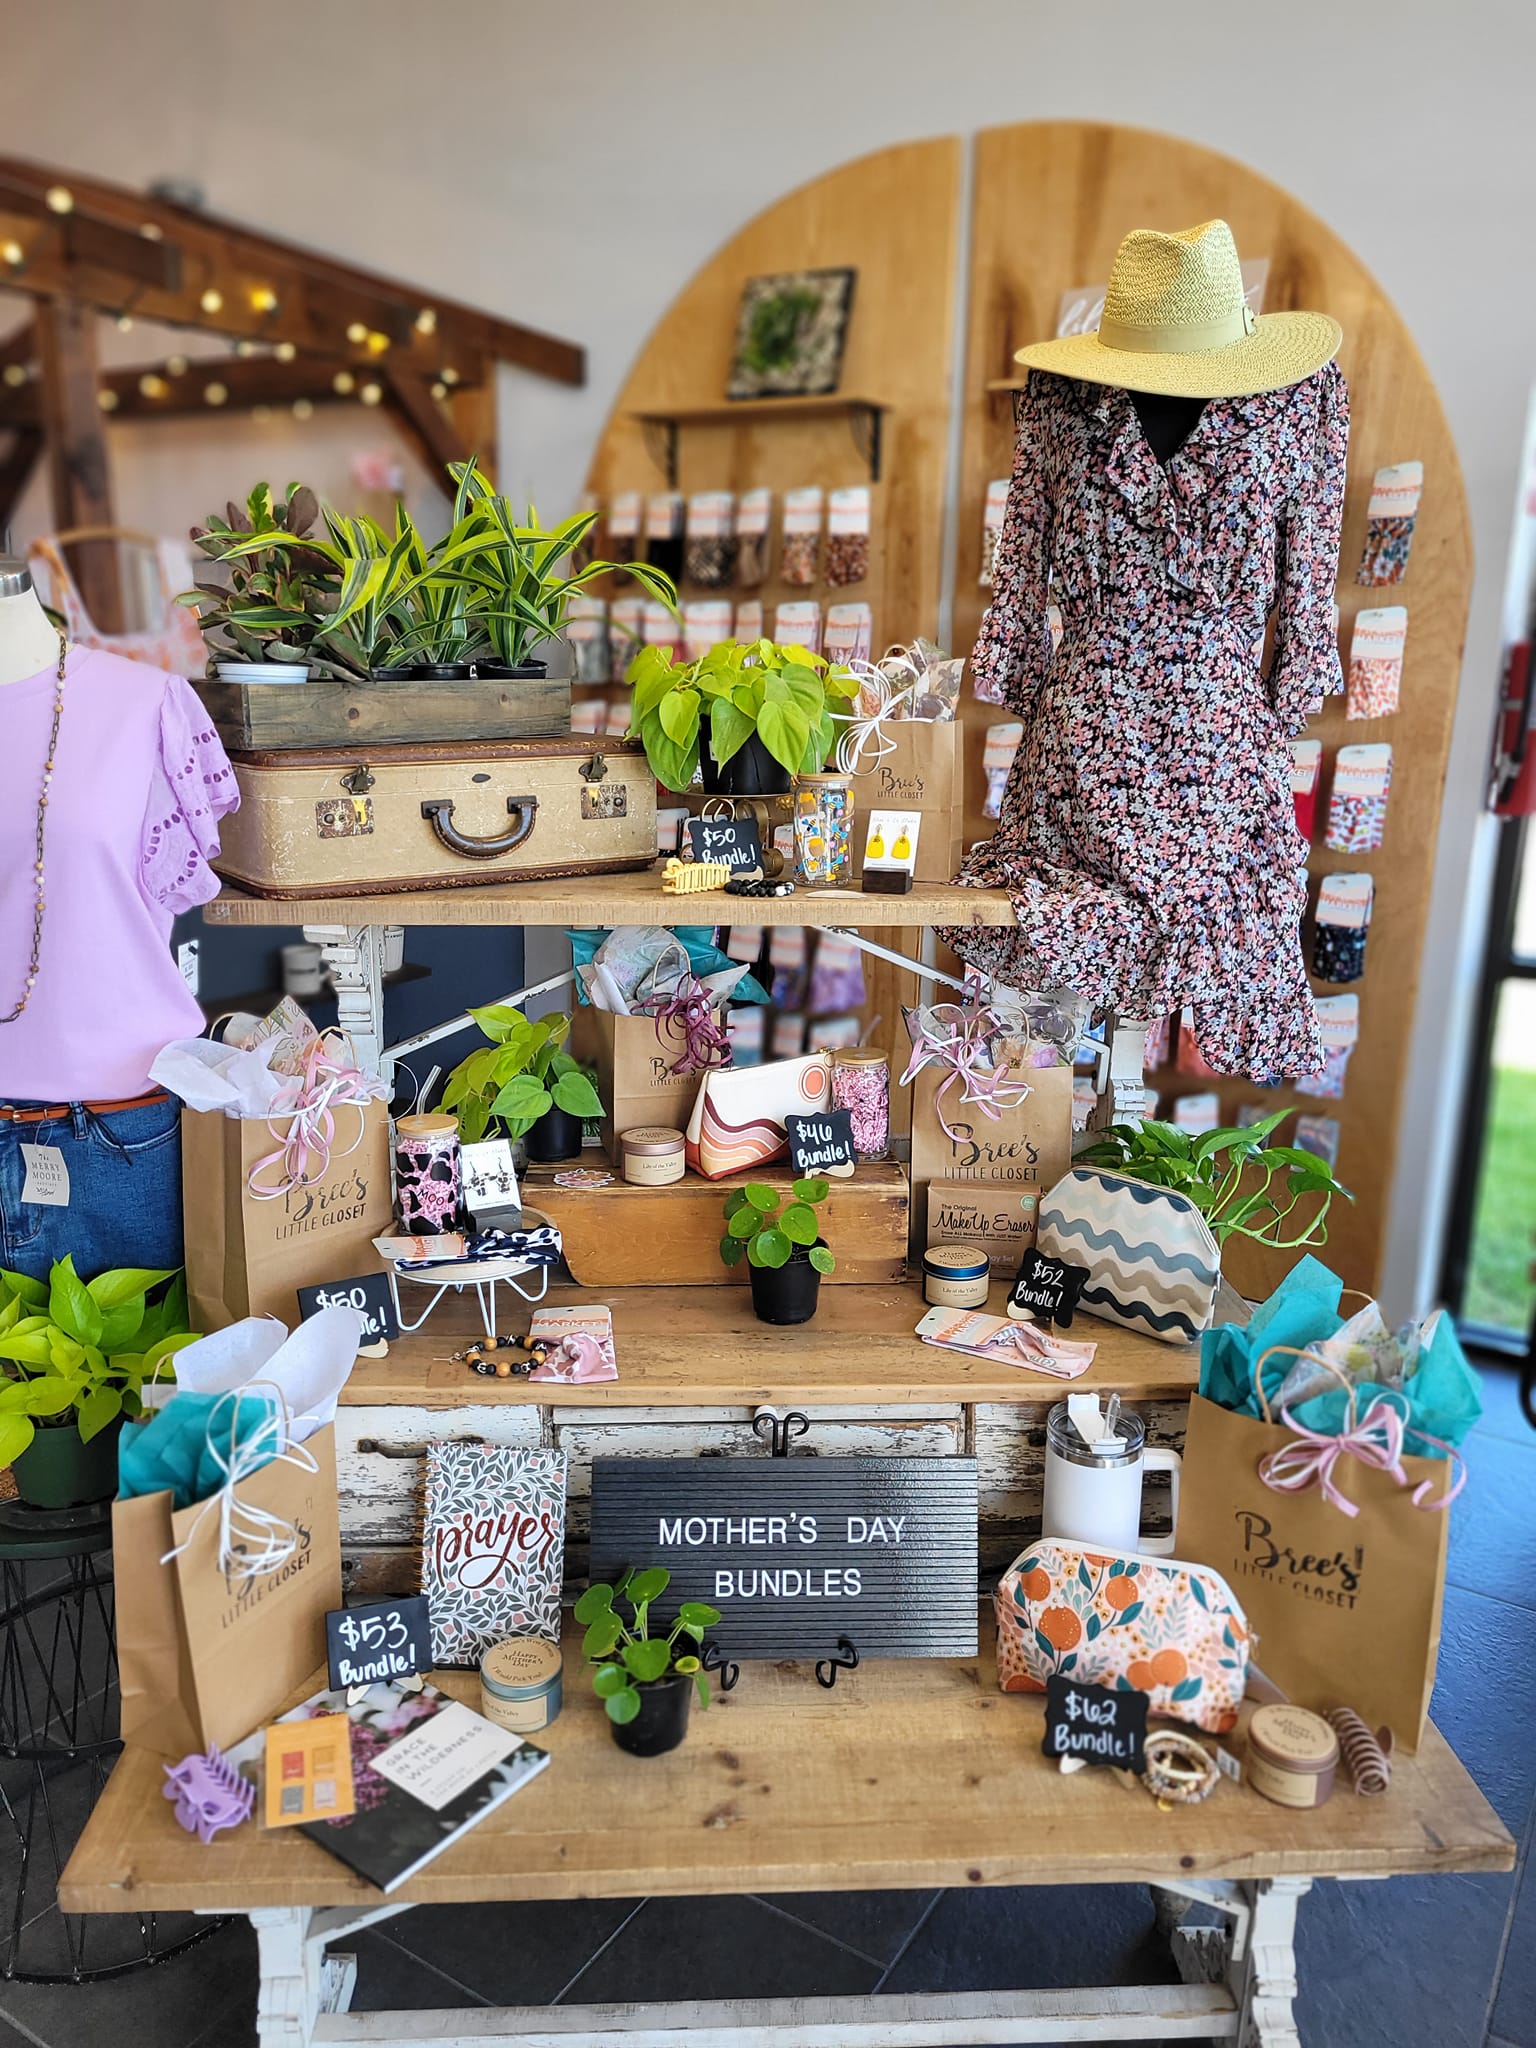 A display of Mother's Day gift bundles inside a boutique store